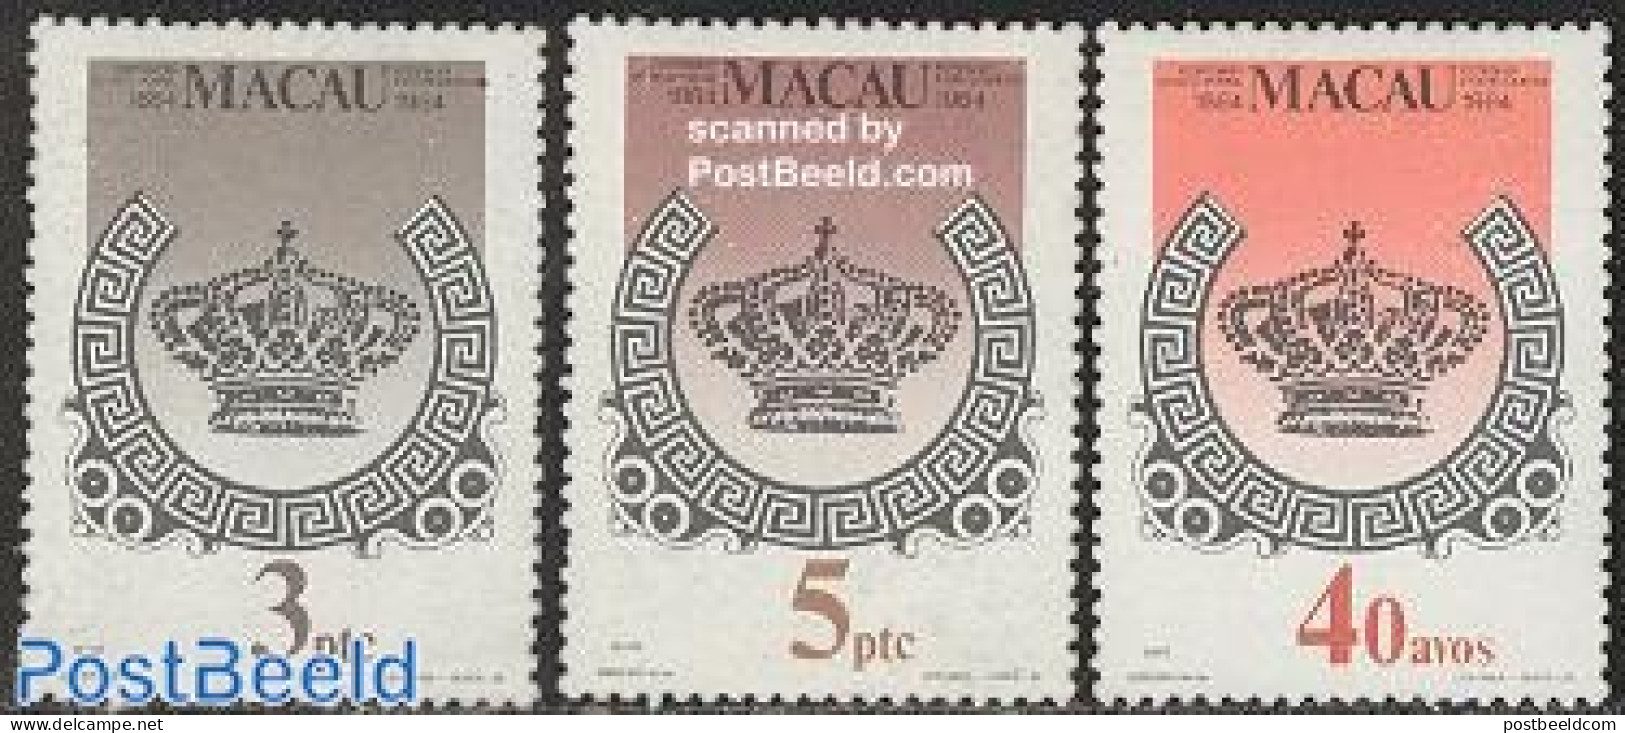 Macao 1984 Stamp Centenary 3v, Mint NH, 100 Years Stamps - Post - Stamps On Stamps - Nuevos